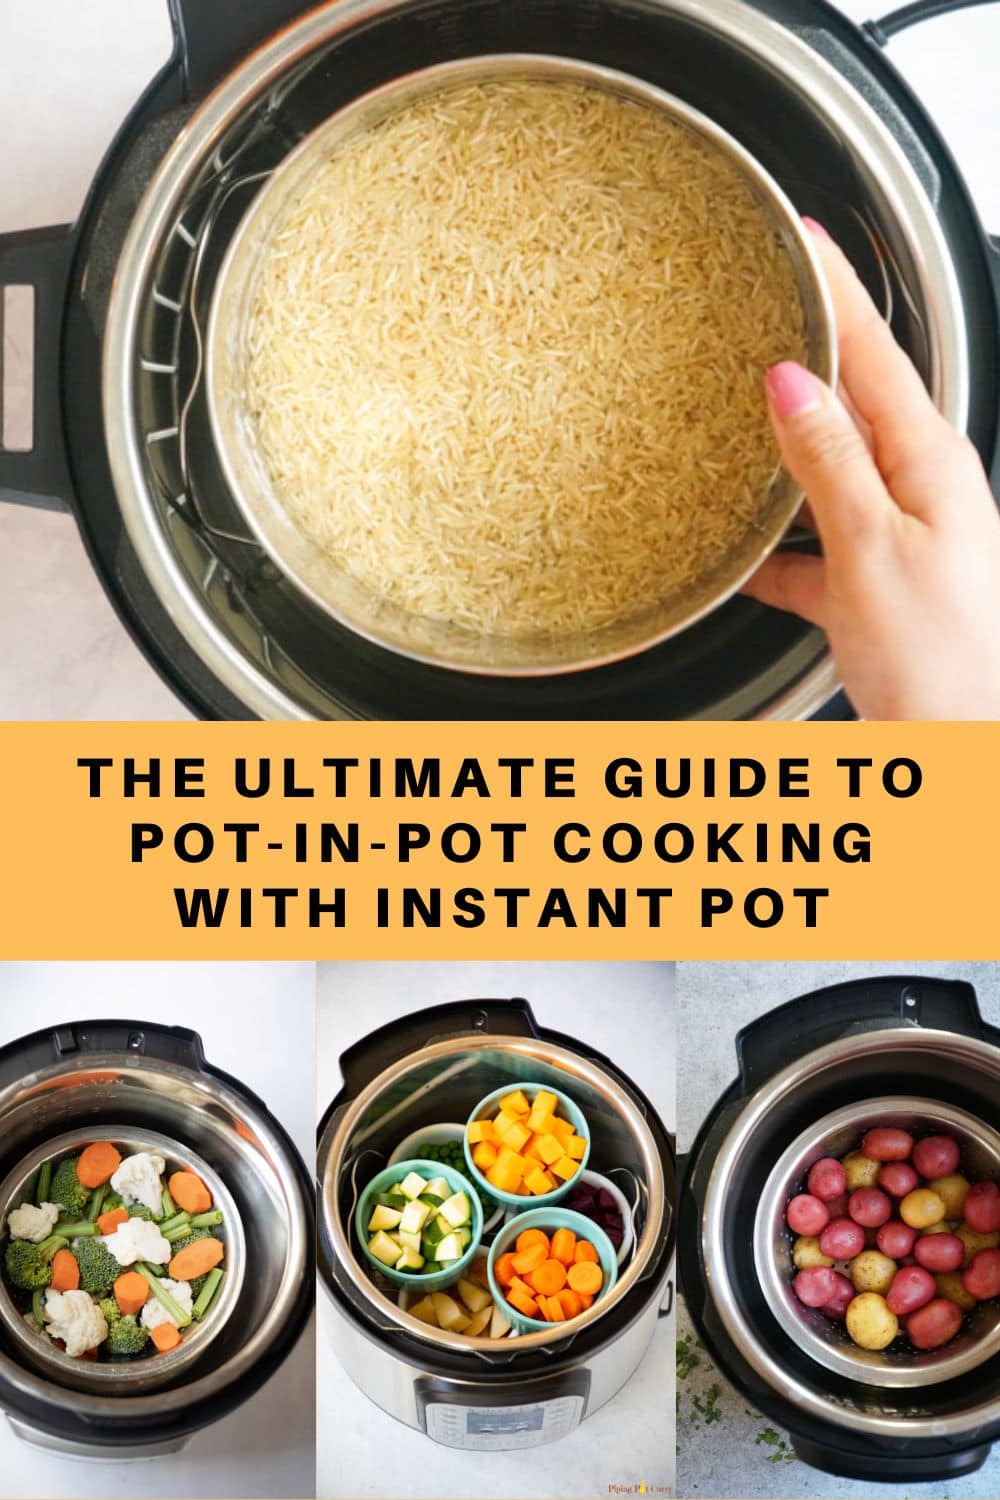 https://pipingpotcurry.com/wp-content/uploads/2022/09/Instant-pot-pot-in-pot-cooking.jpg